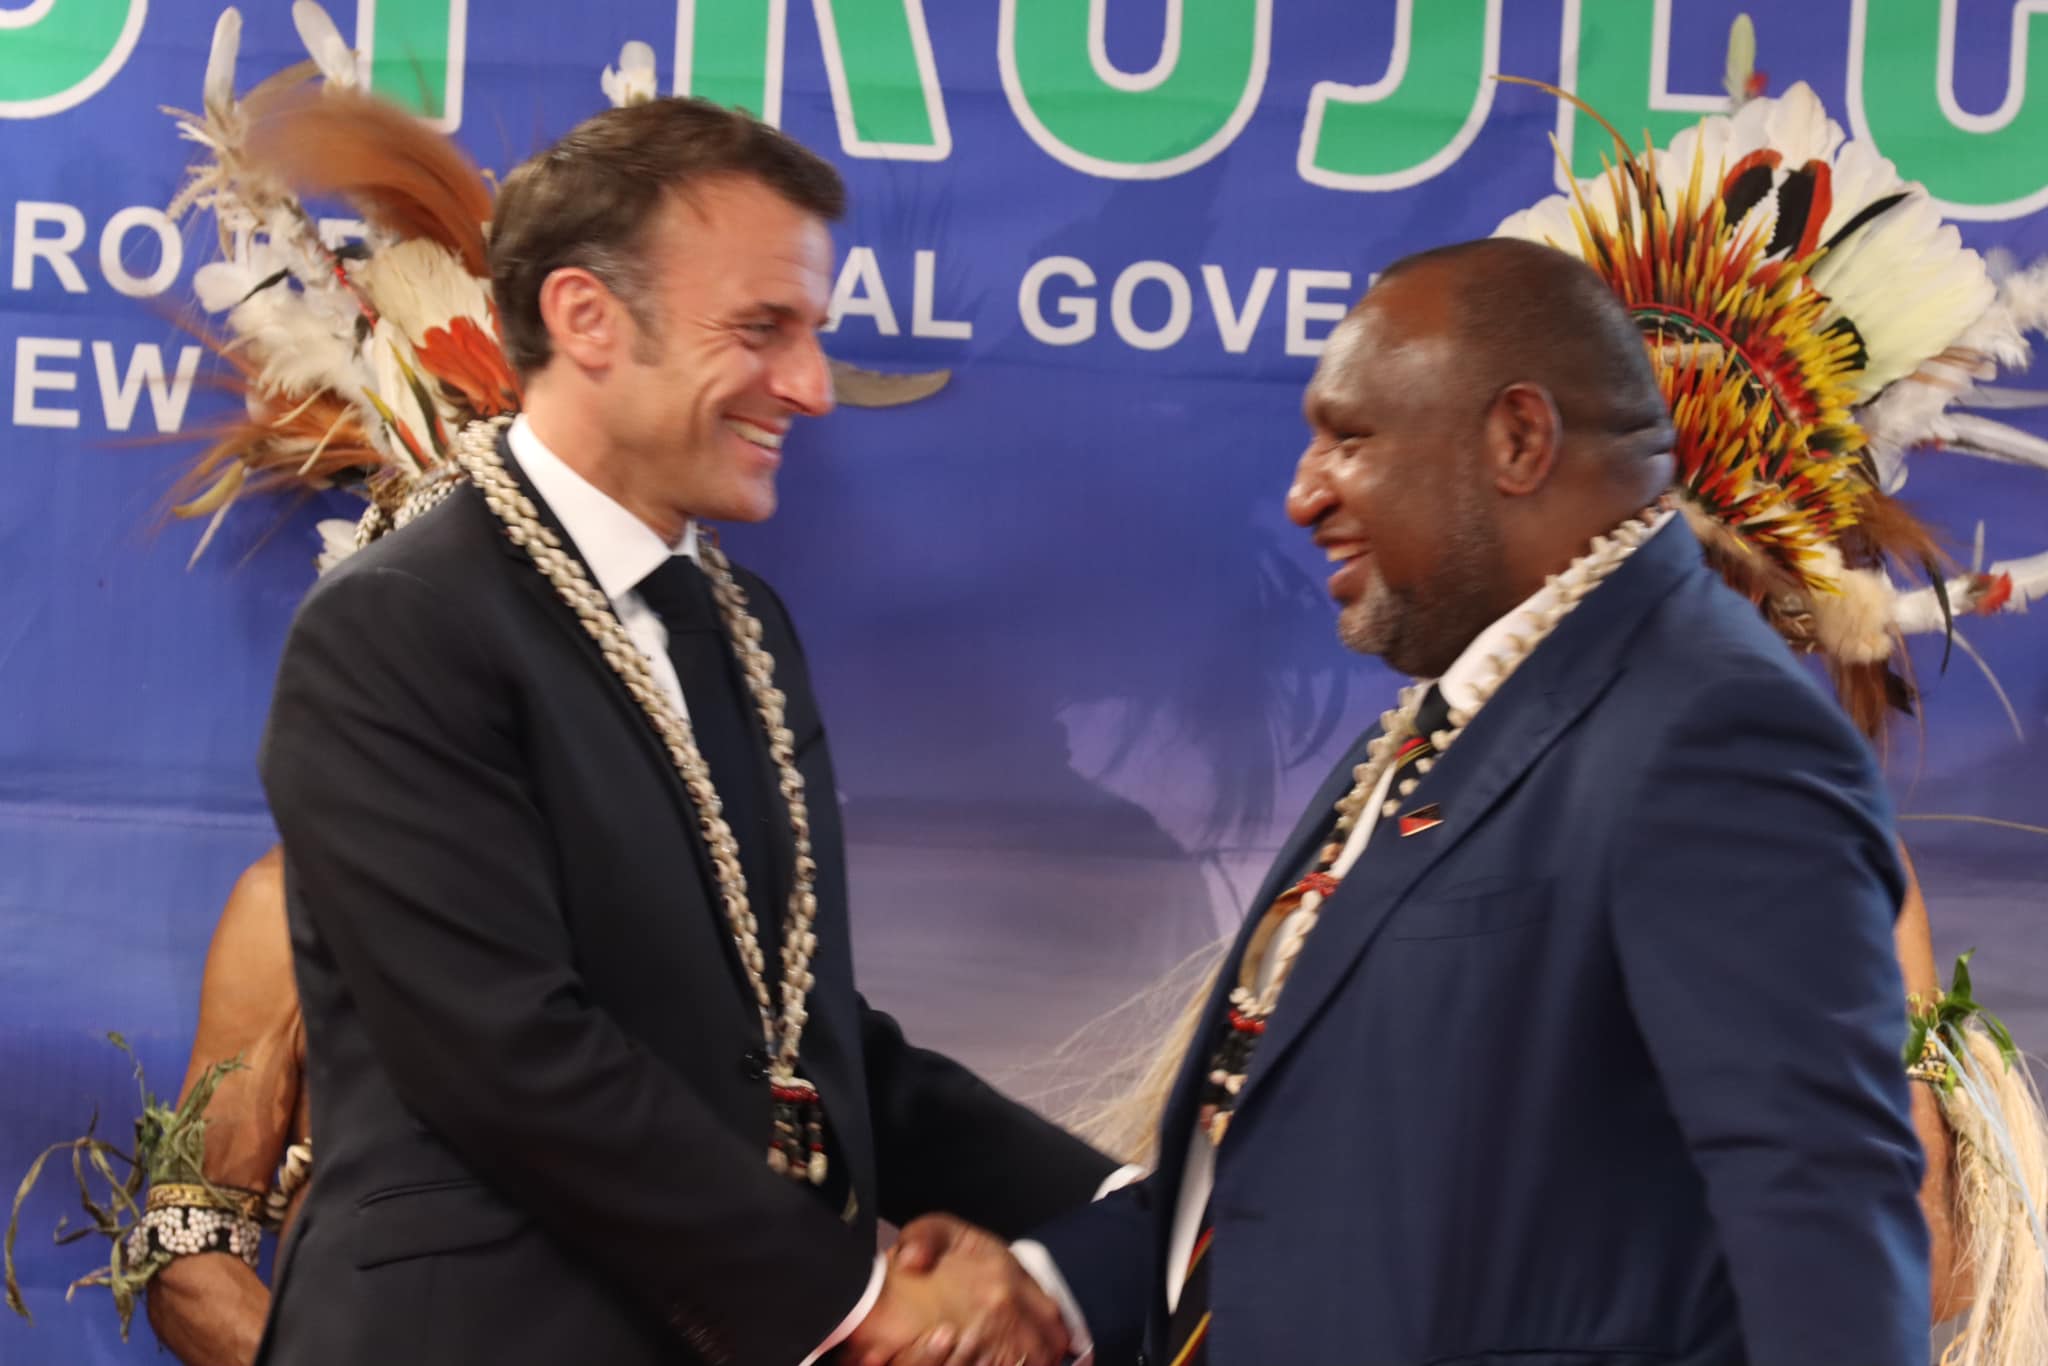 FRANCE TO HELP PNG REDUCE CARBON EMISSION – PRESIDENT MACRON TELLS STUDENTS